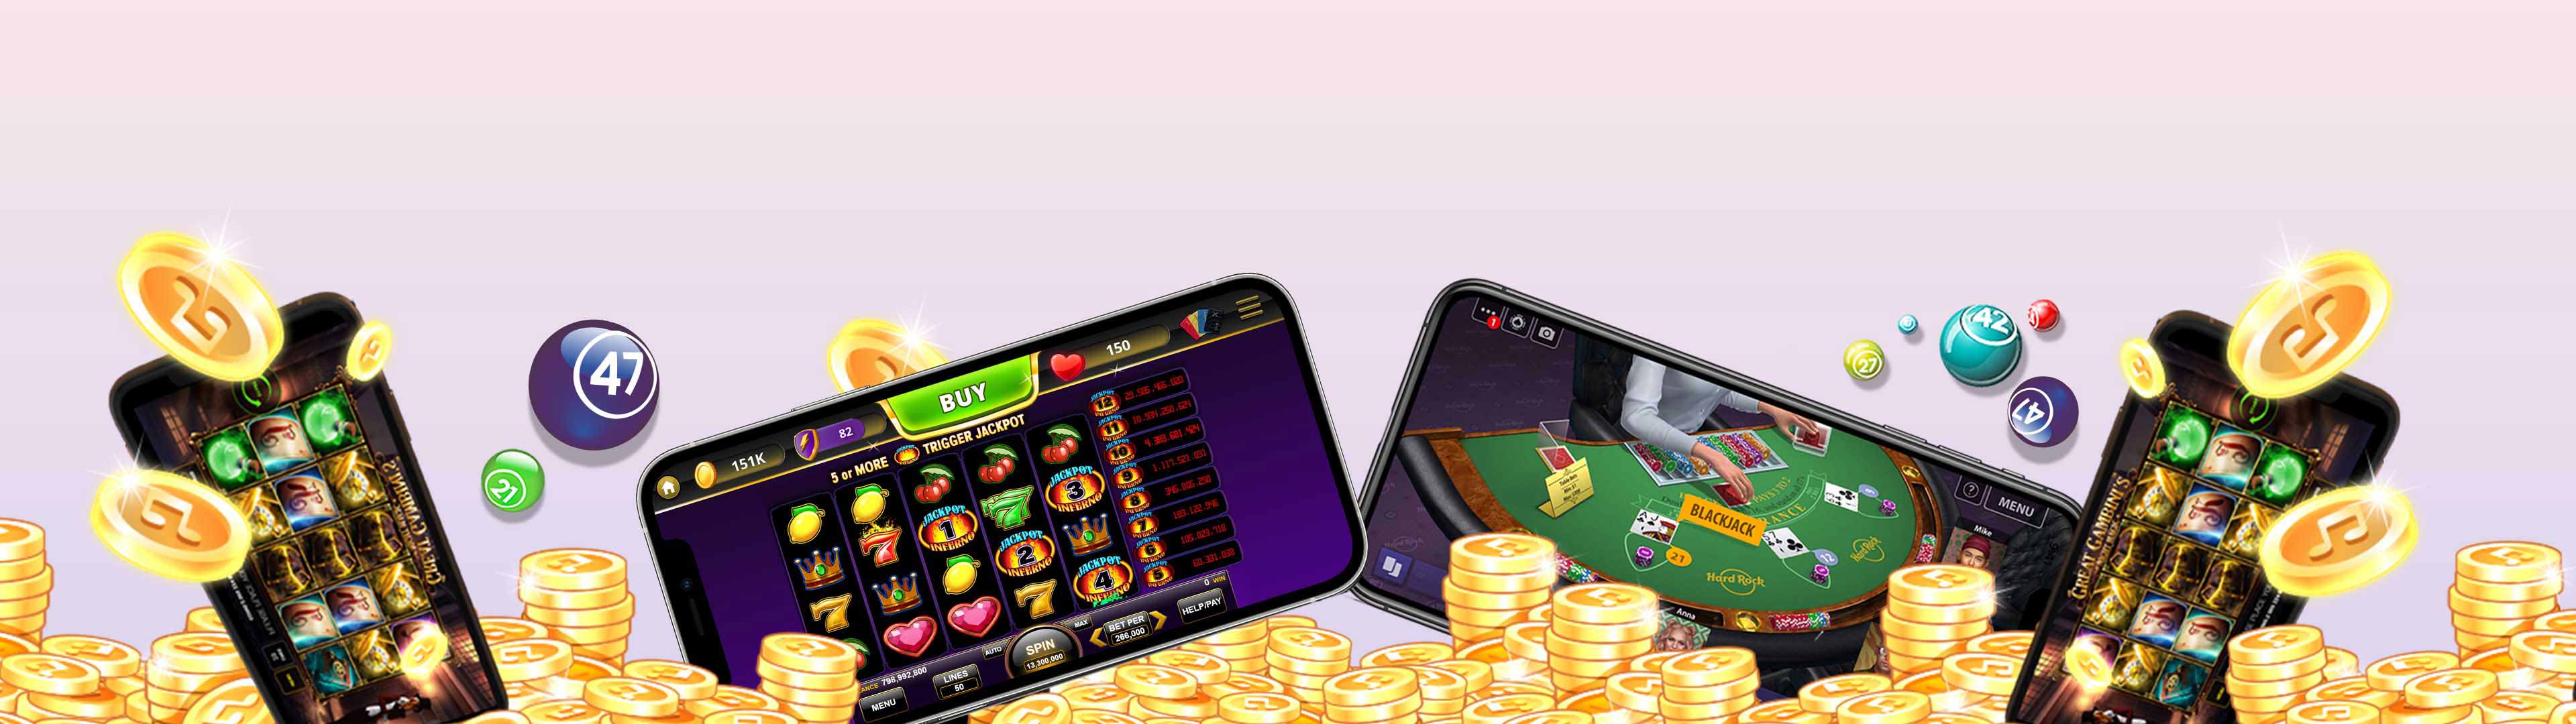 Online Games, How to deposit money in Casino games, Play games and earn  money